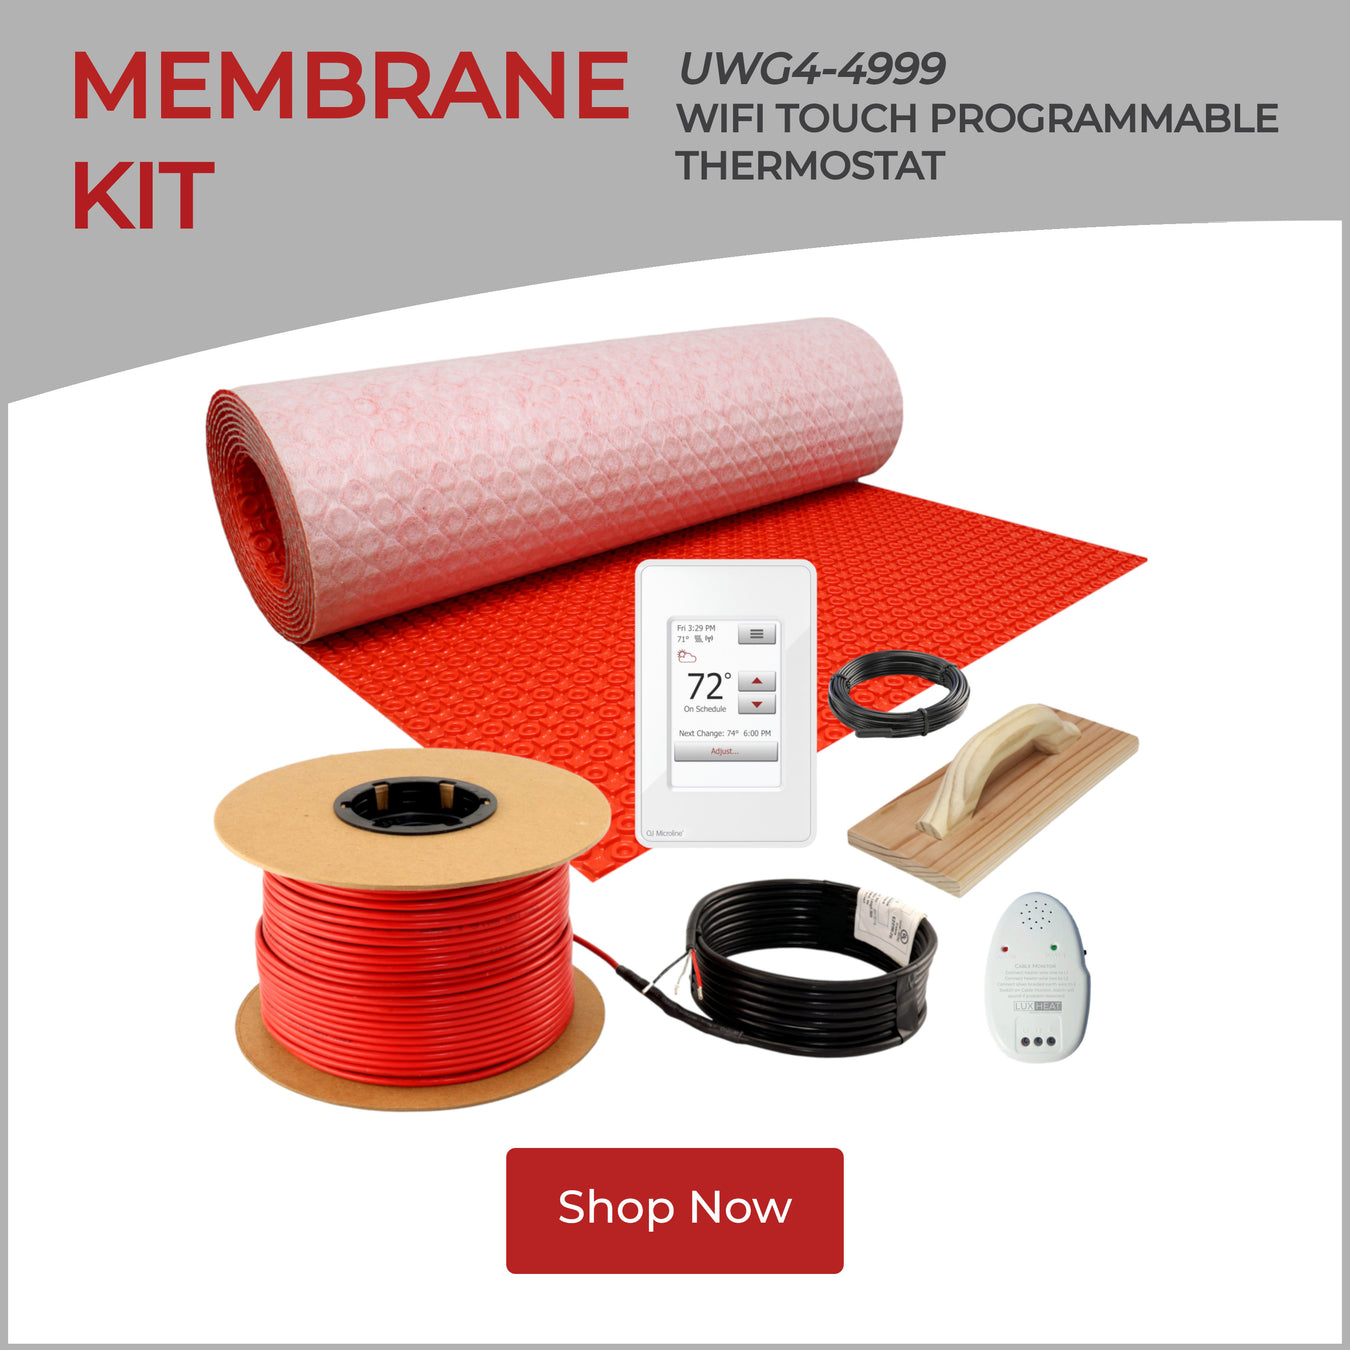 Overview_-_Membrane_Kit_with_UWG4